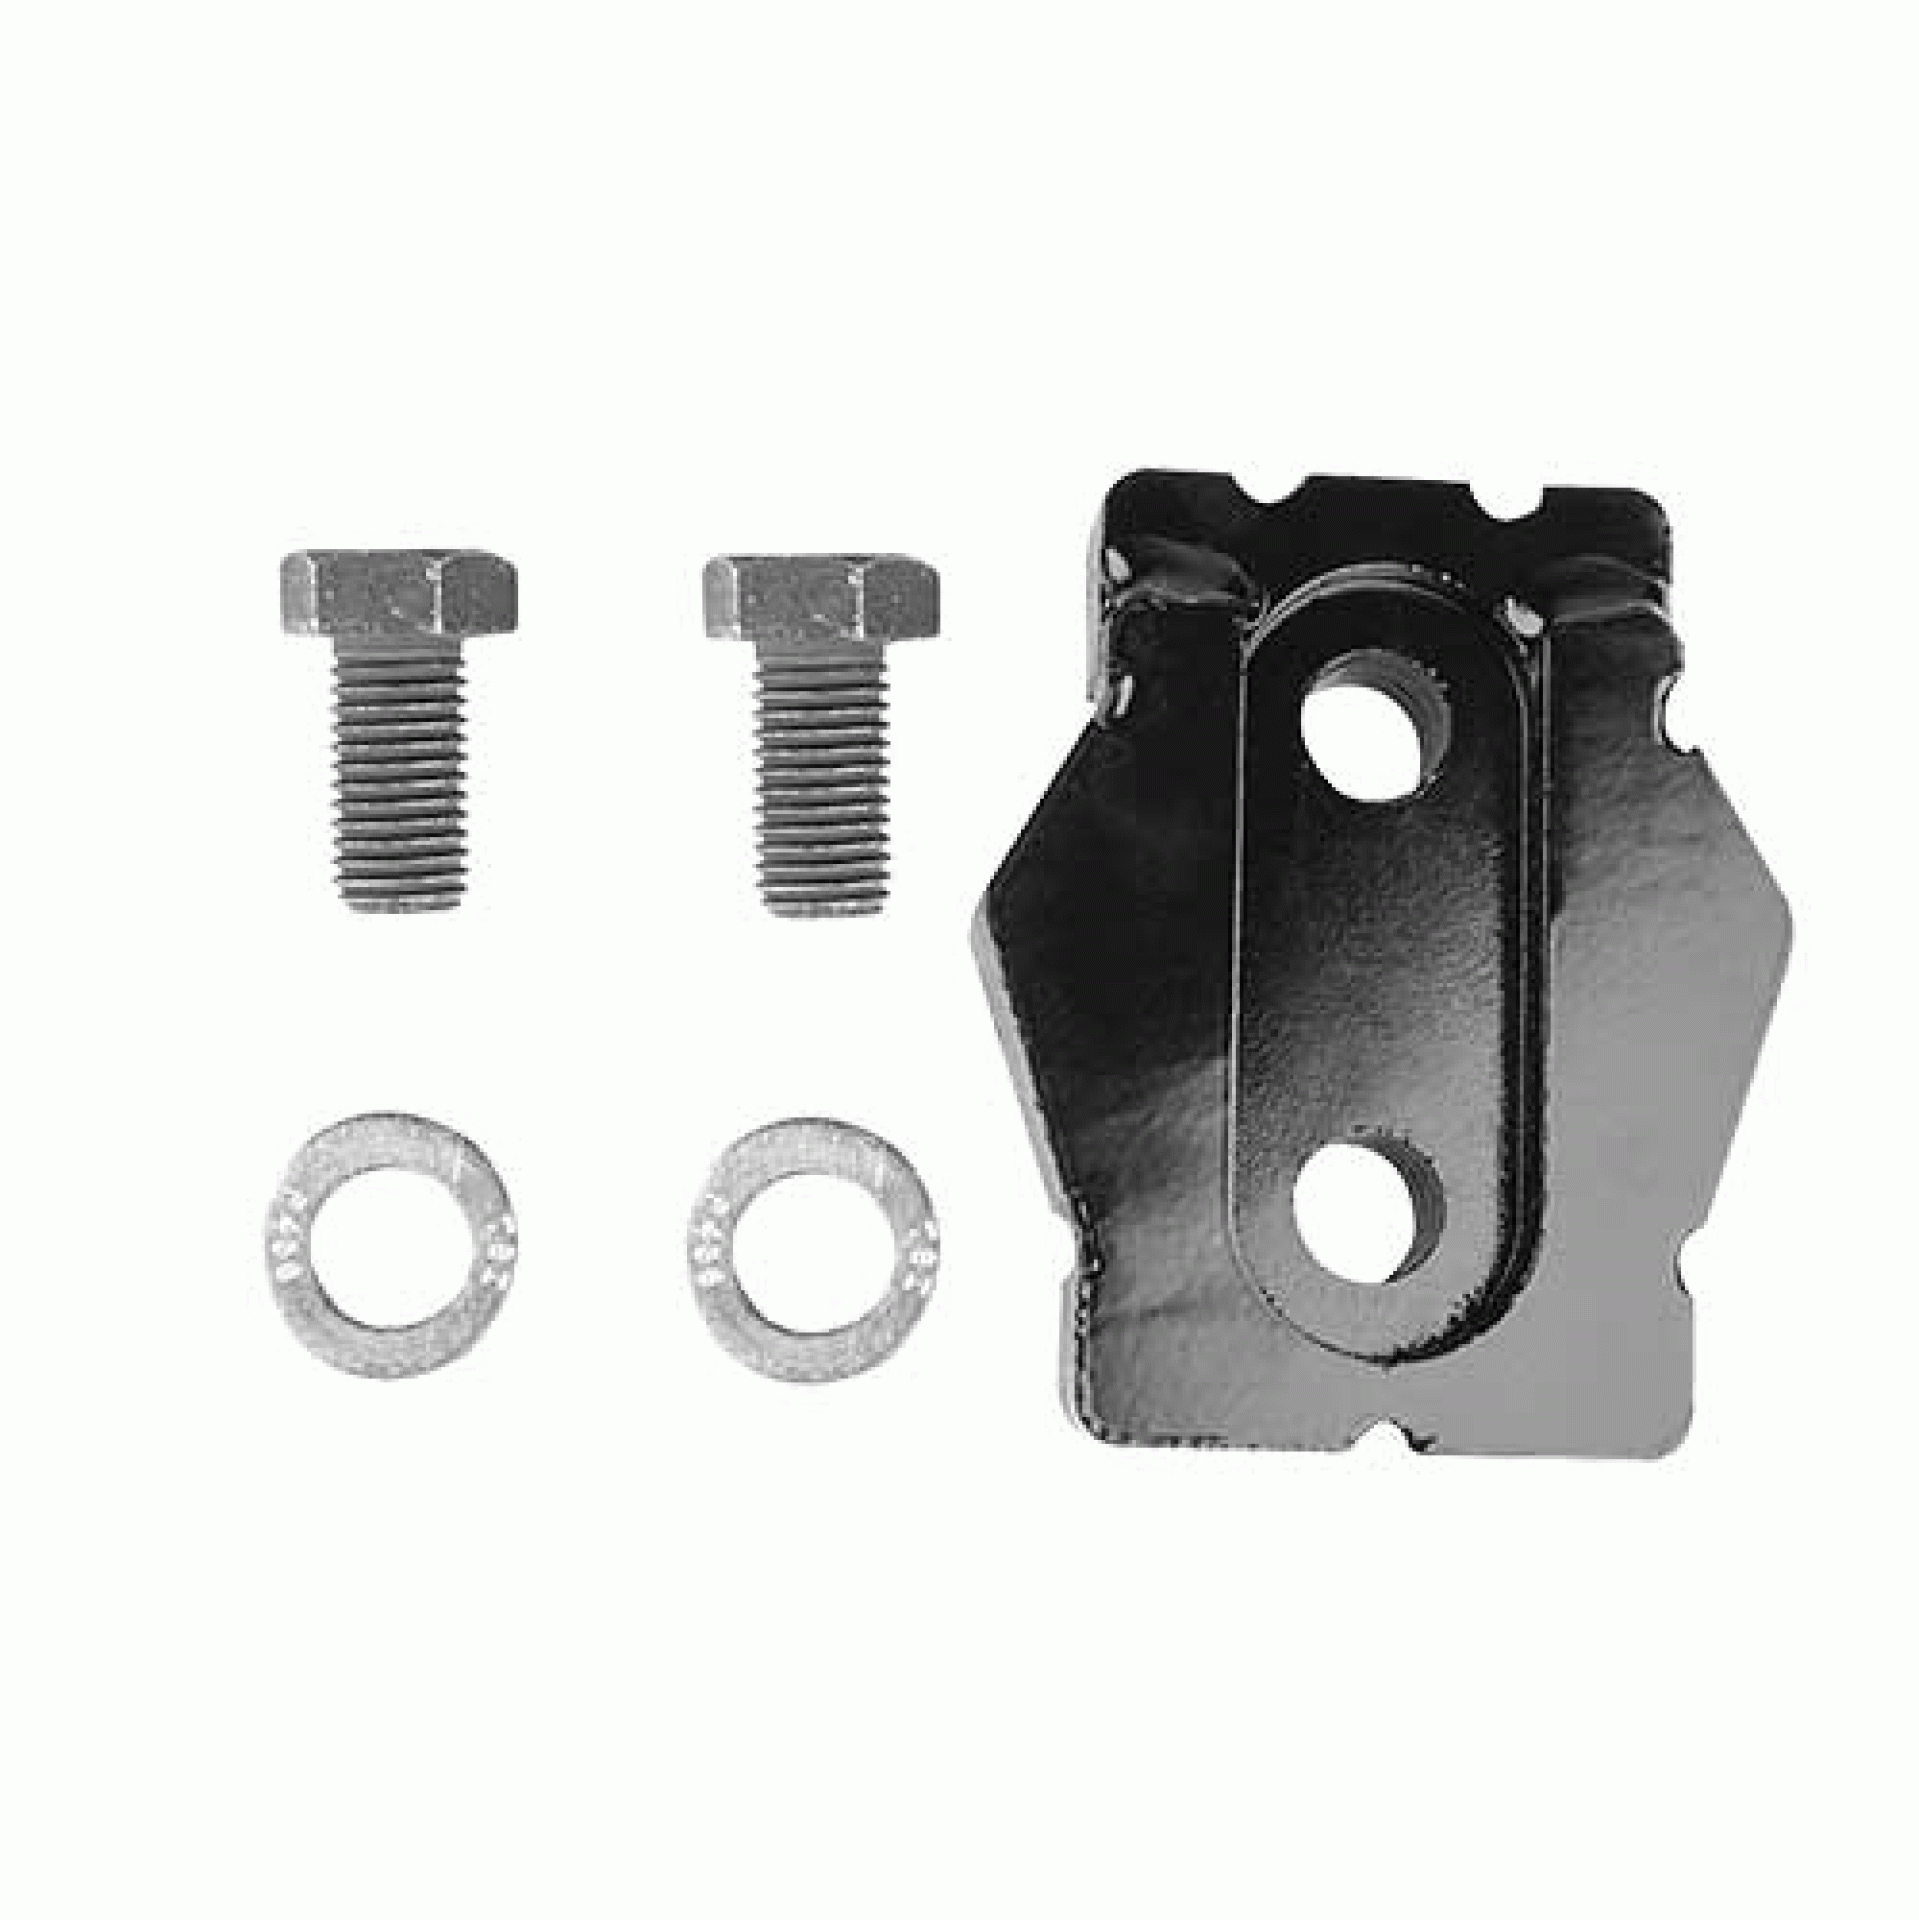 REESE | 68203 | Wedge Kit - Compatible with Select Curt